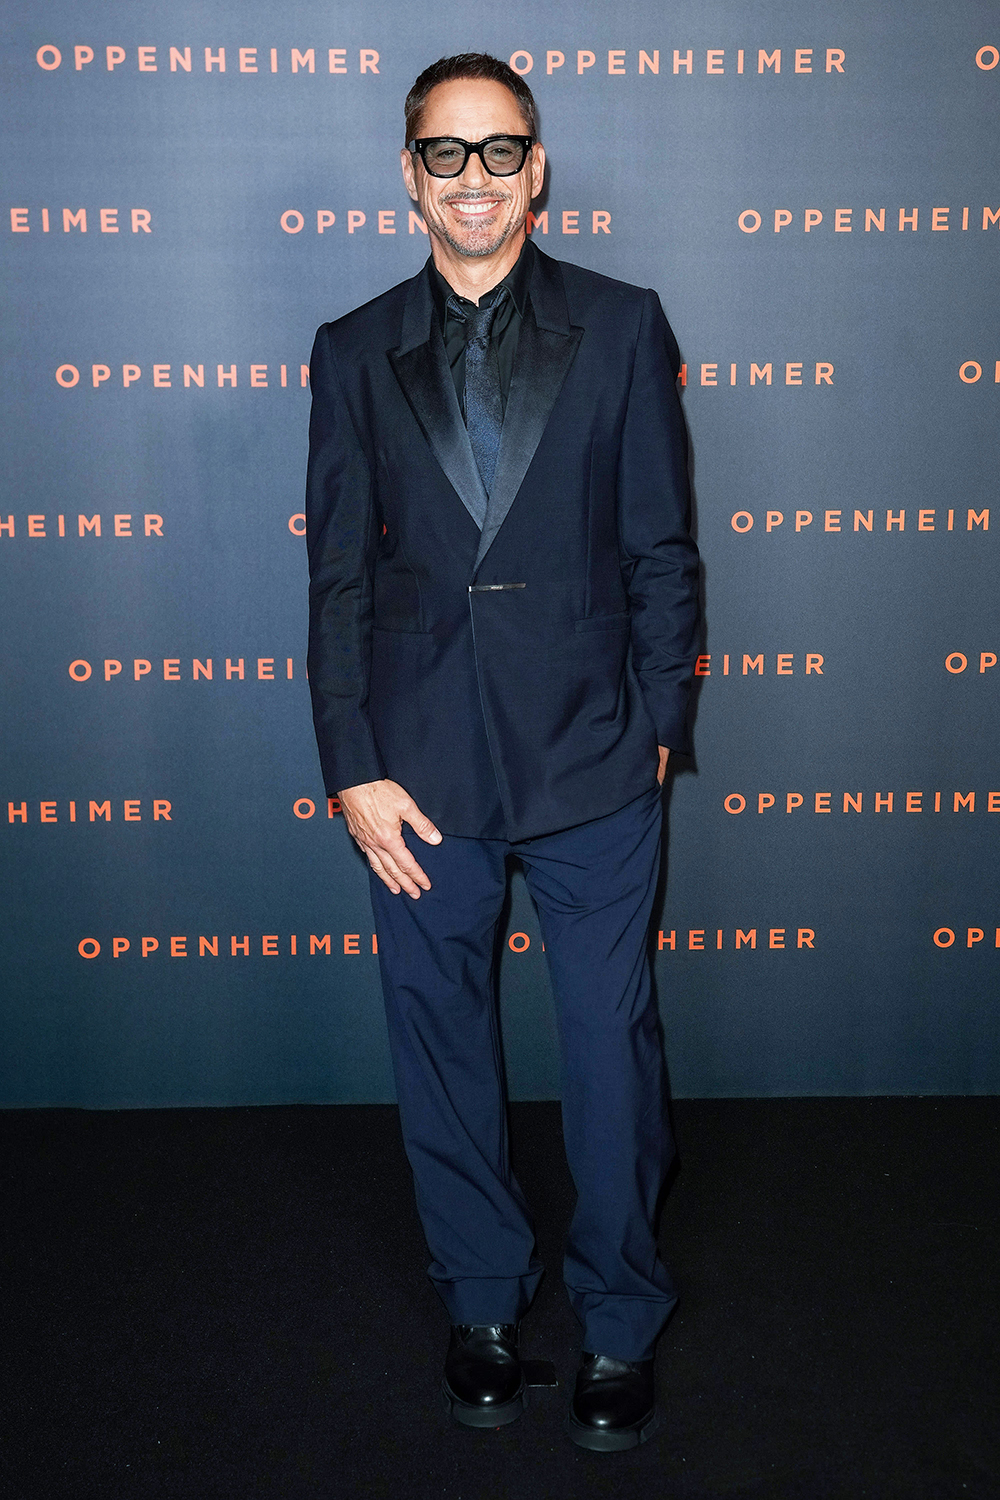 Robert Downey Jr opted for an all-dark ensemble at the ‘Oppenheimer’ premiere in Paris, France, on Tuesday. The ‘Iron Man’ actor flashed his intimitable smile, as well.